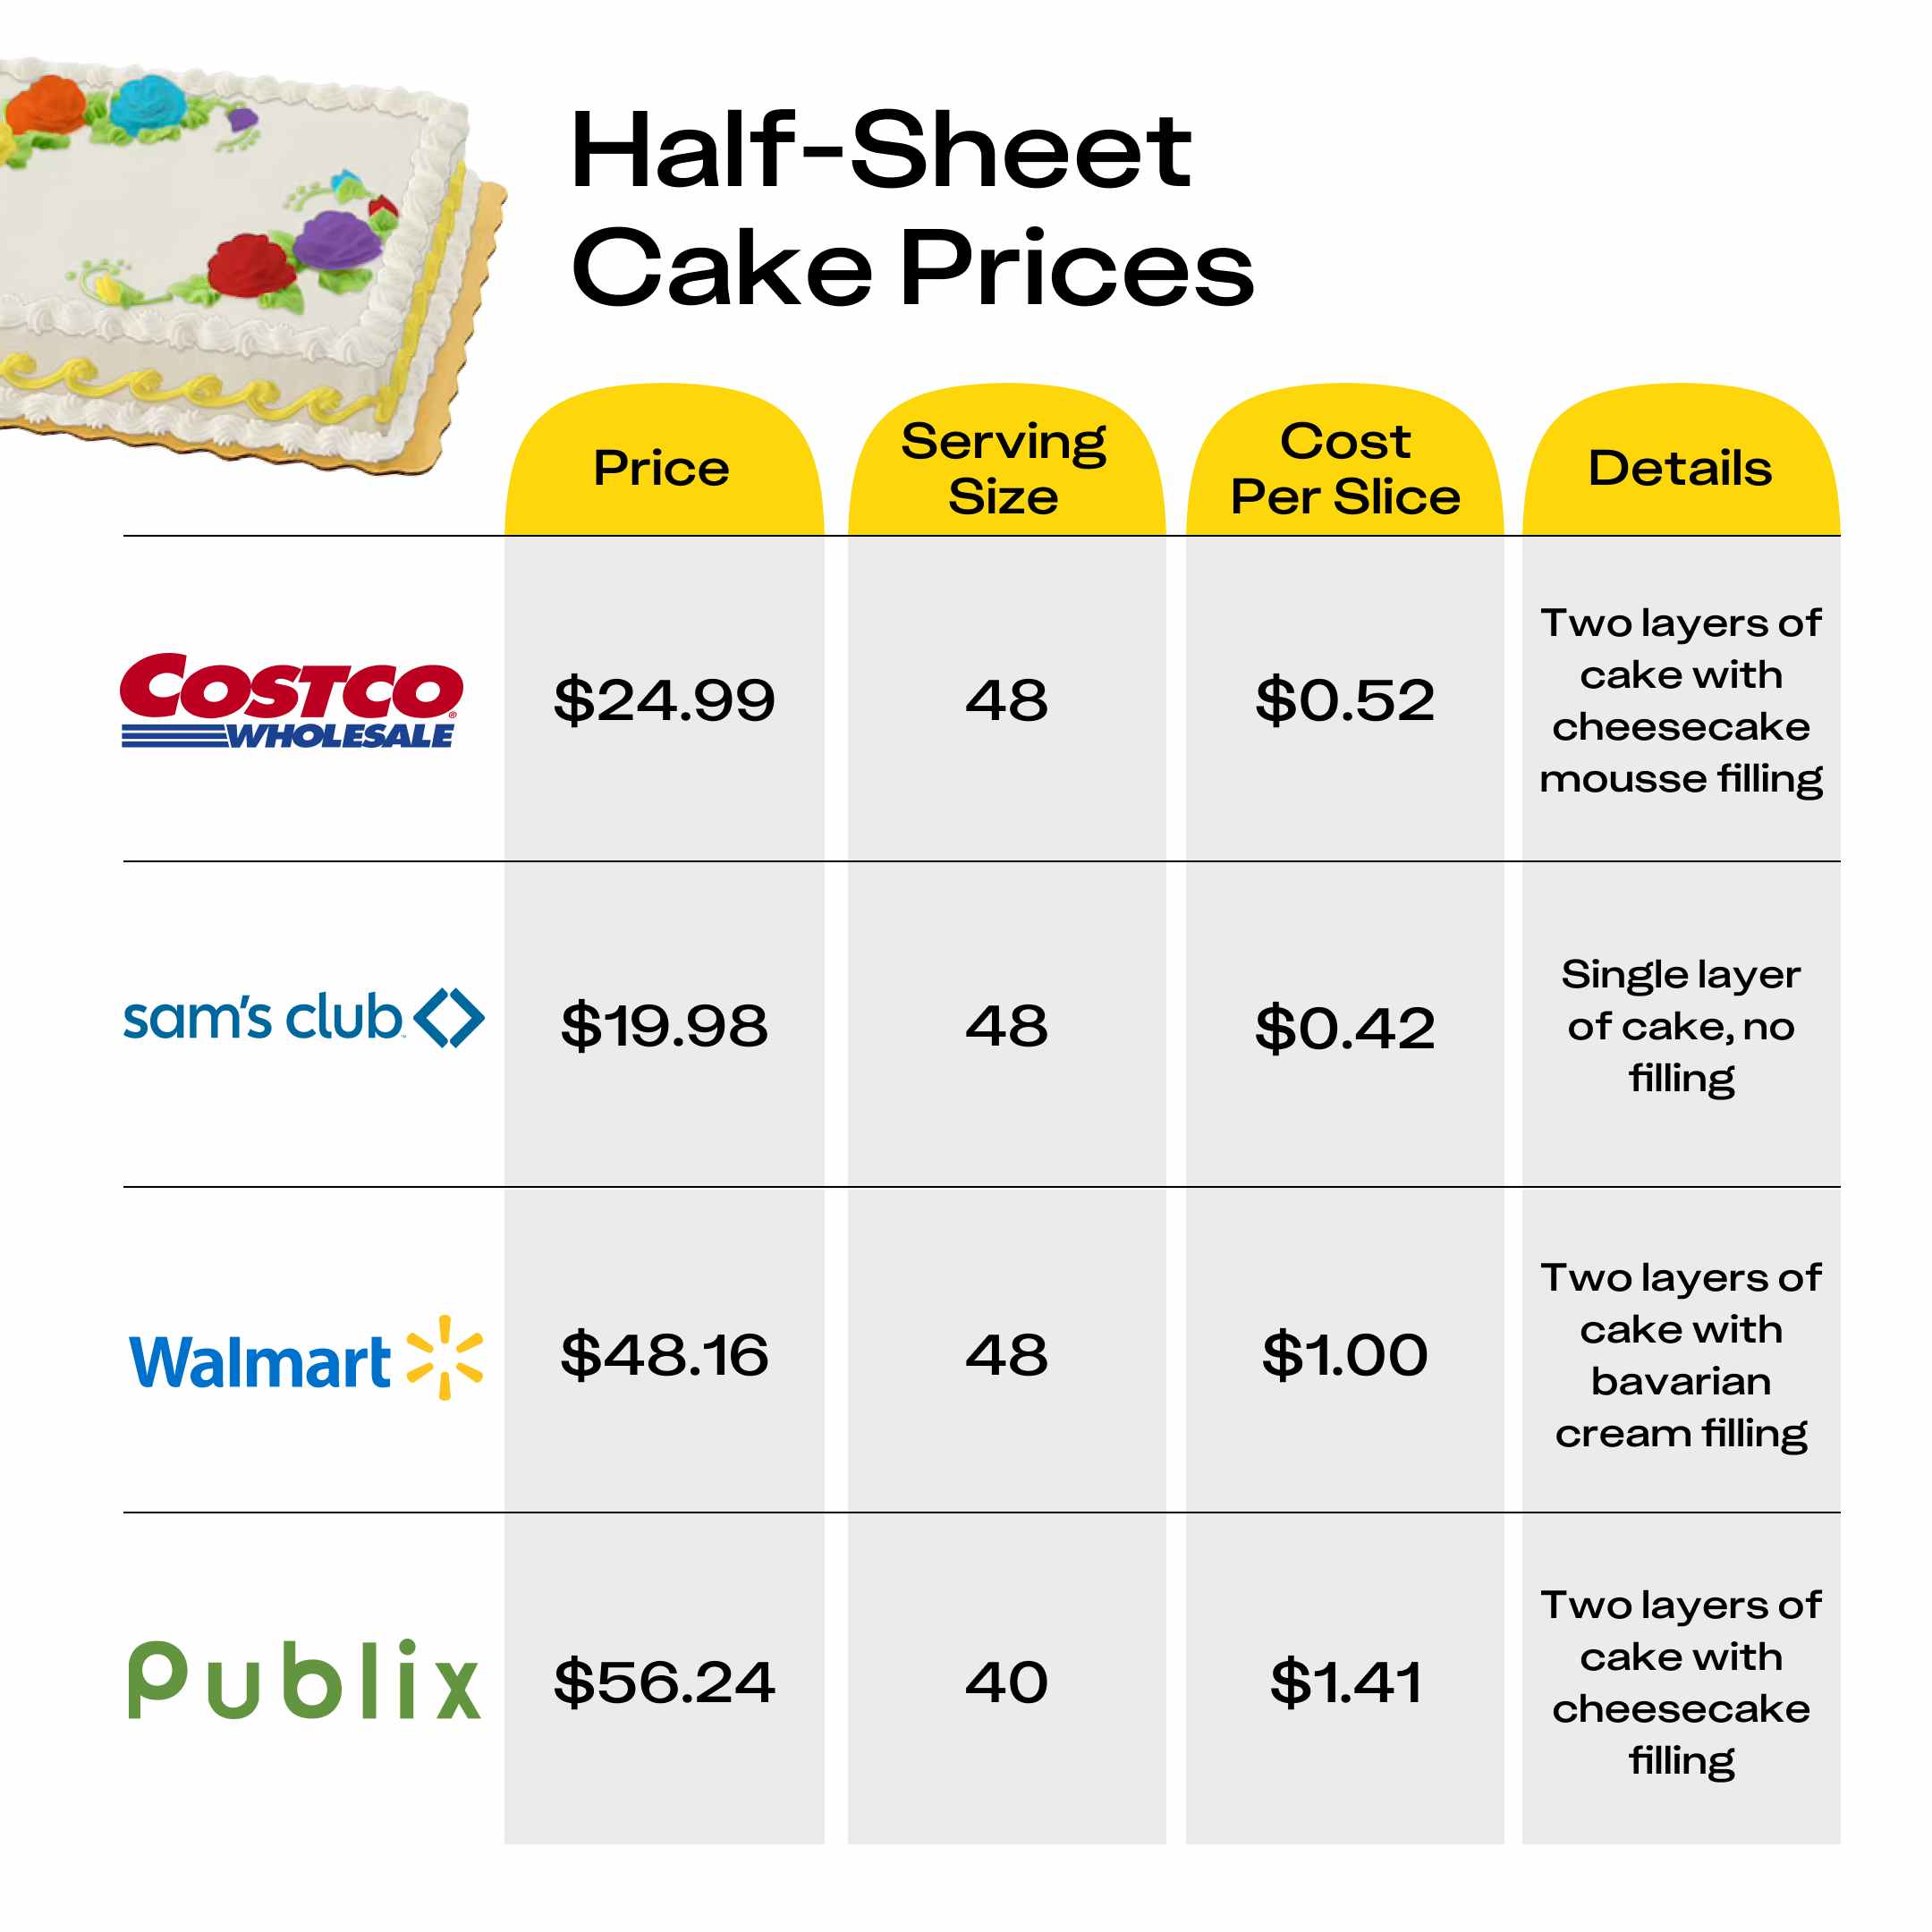 Comparison of the half-sheet cake prices at Costco, Sam's Club, Walmart, and Publix, showing that the Costco sheet cake is the best value